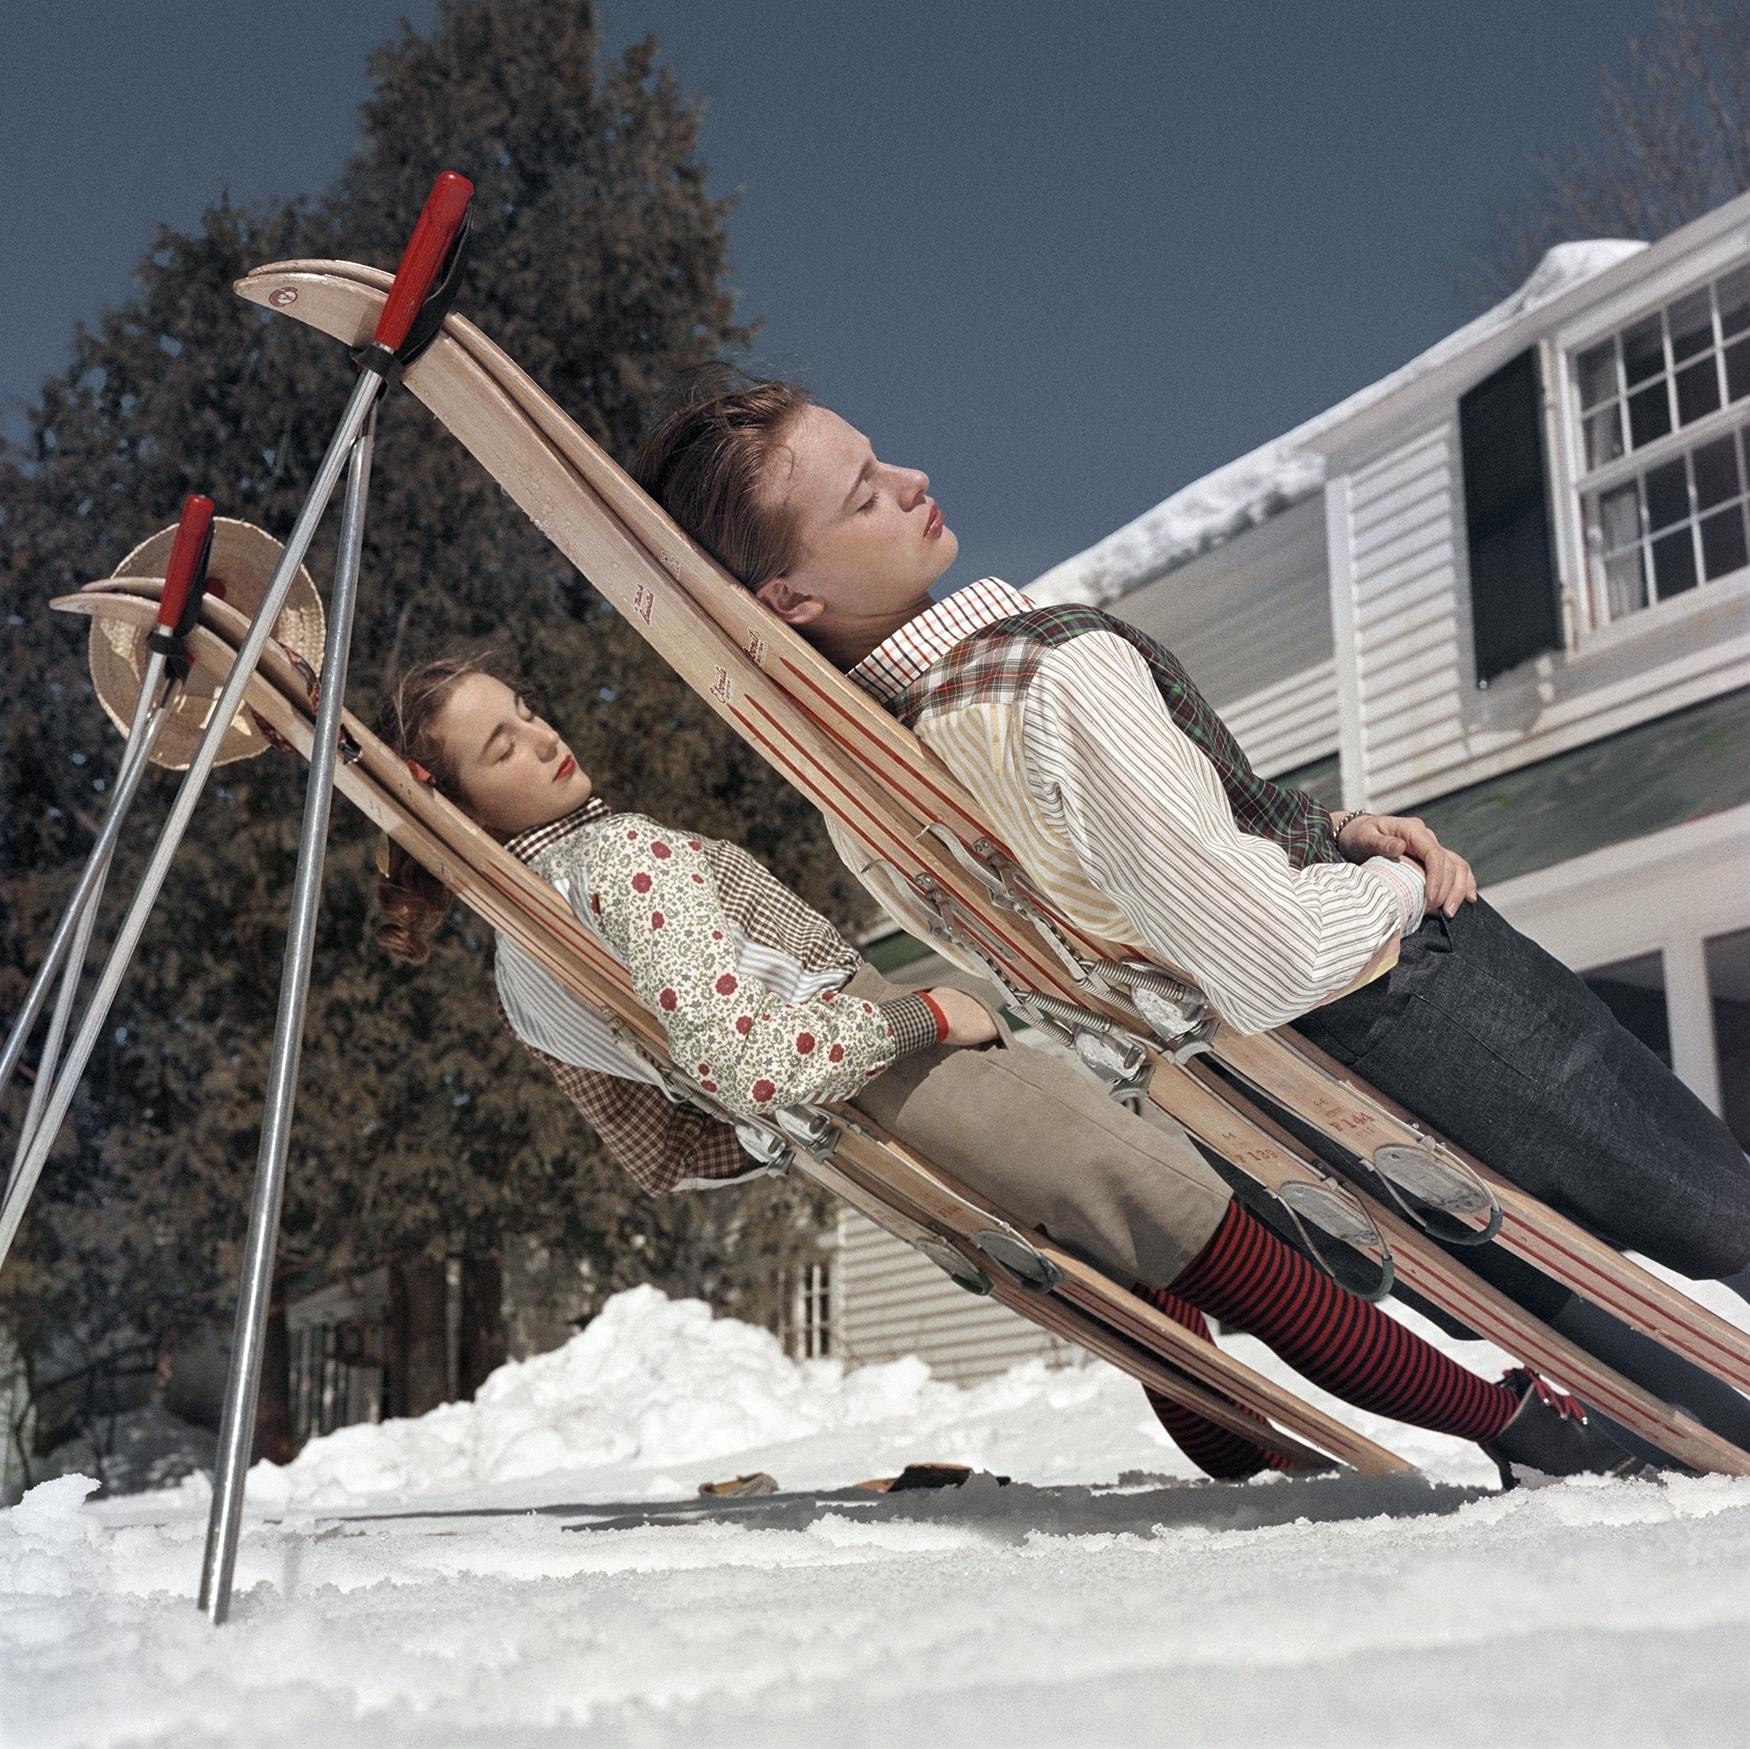 New England Skiing, New Hampshire by Slim Aarons